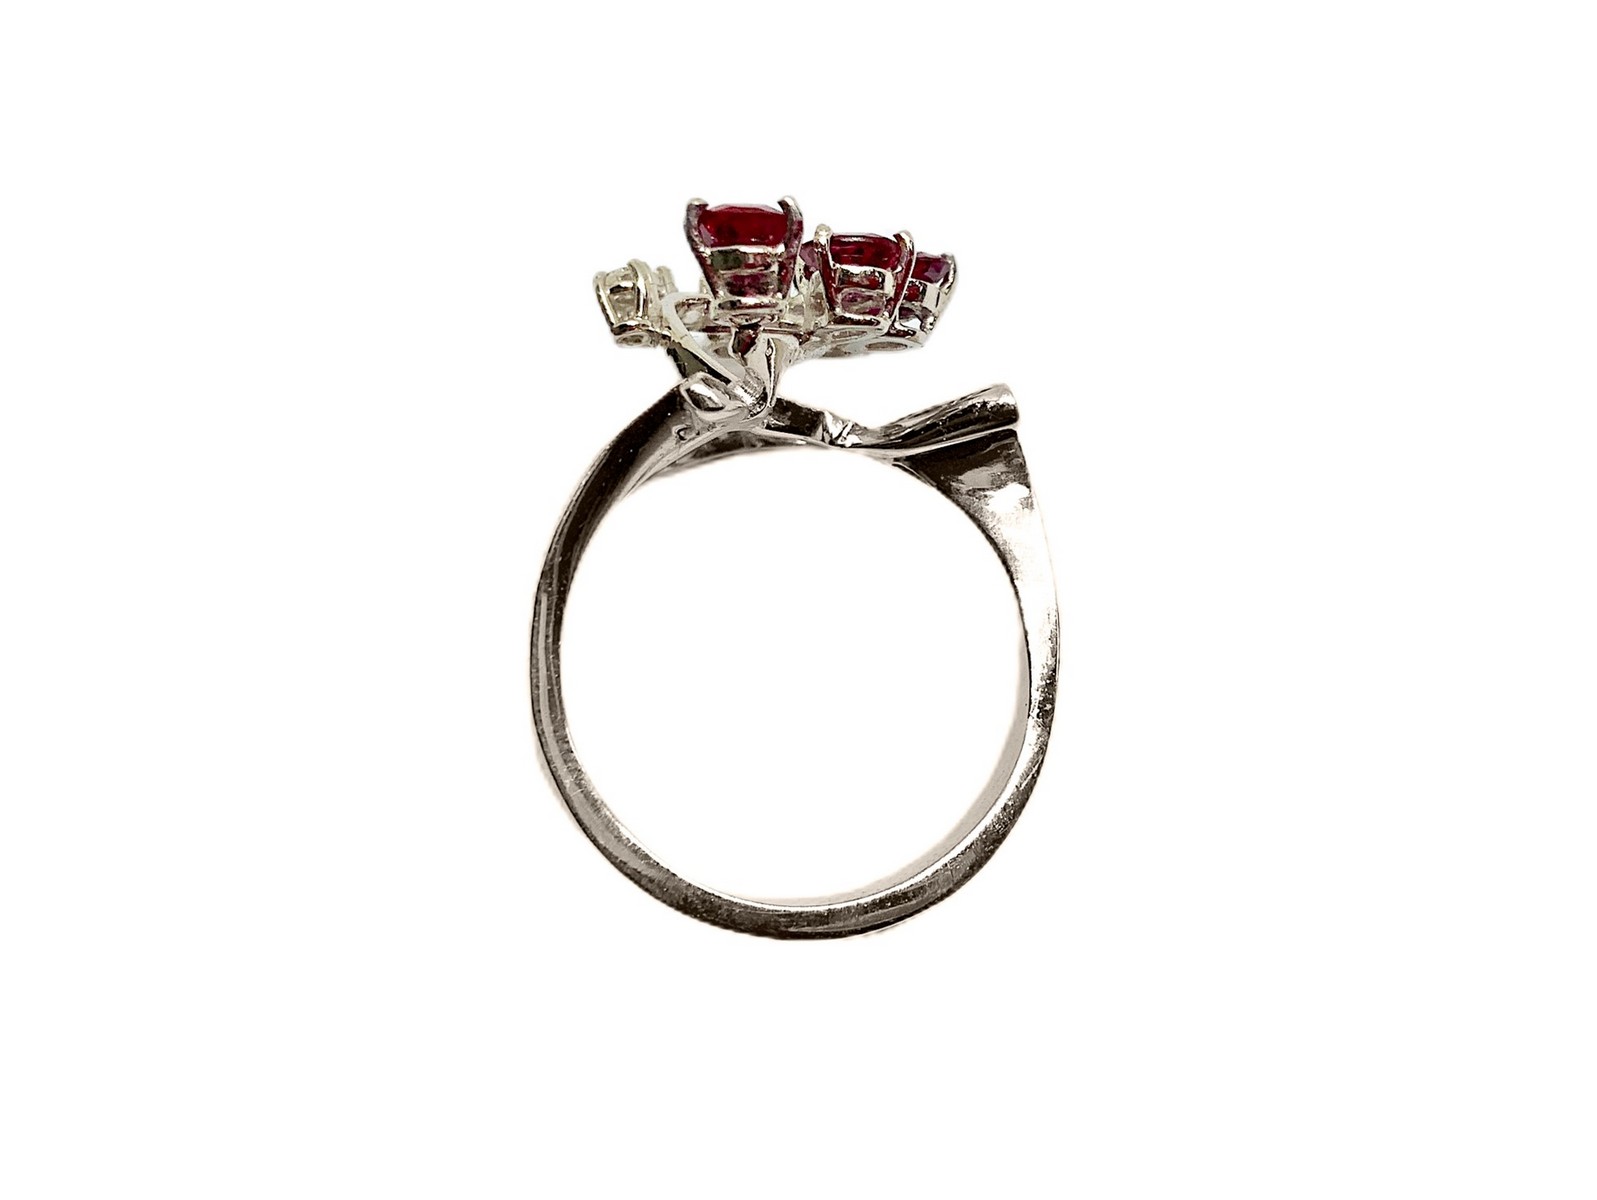 White gold ring with 3 rubies, 1 blue sapphire and 3 brilliants - Image 2 of 5